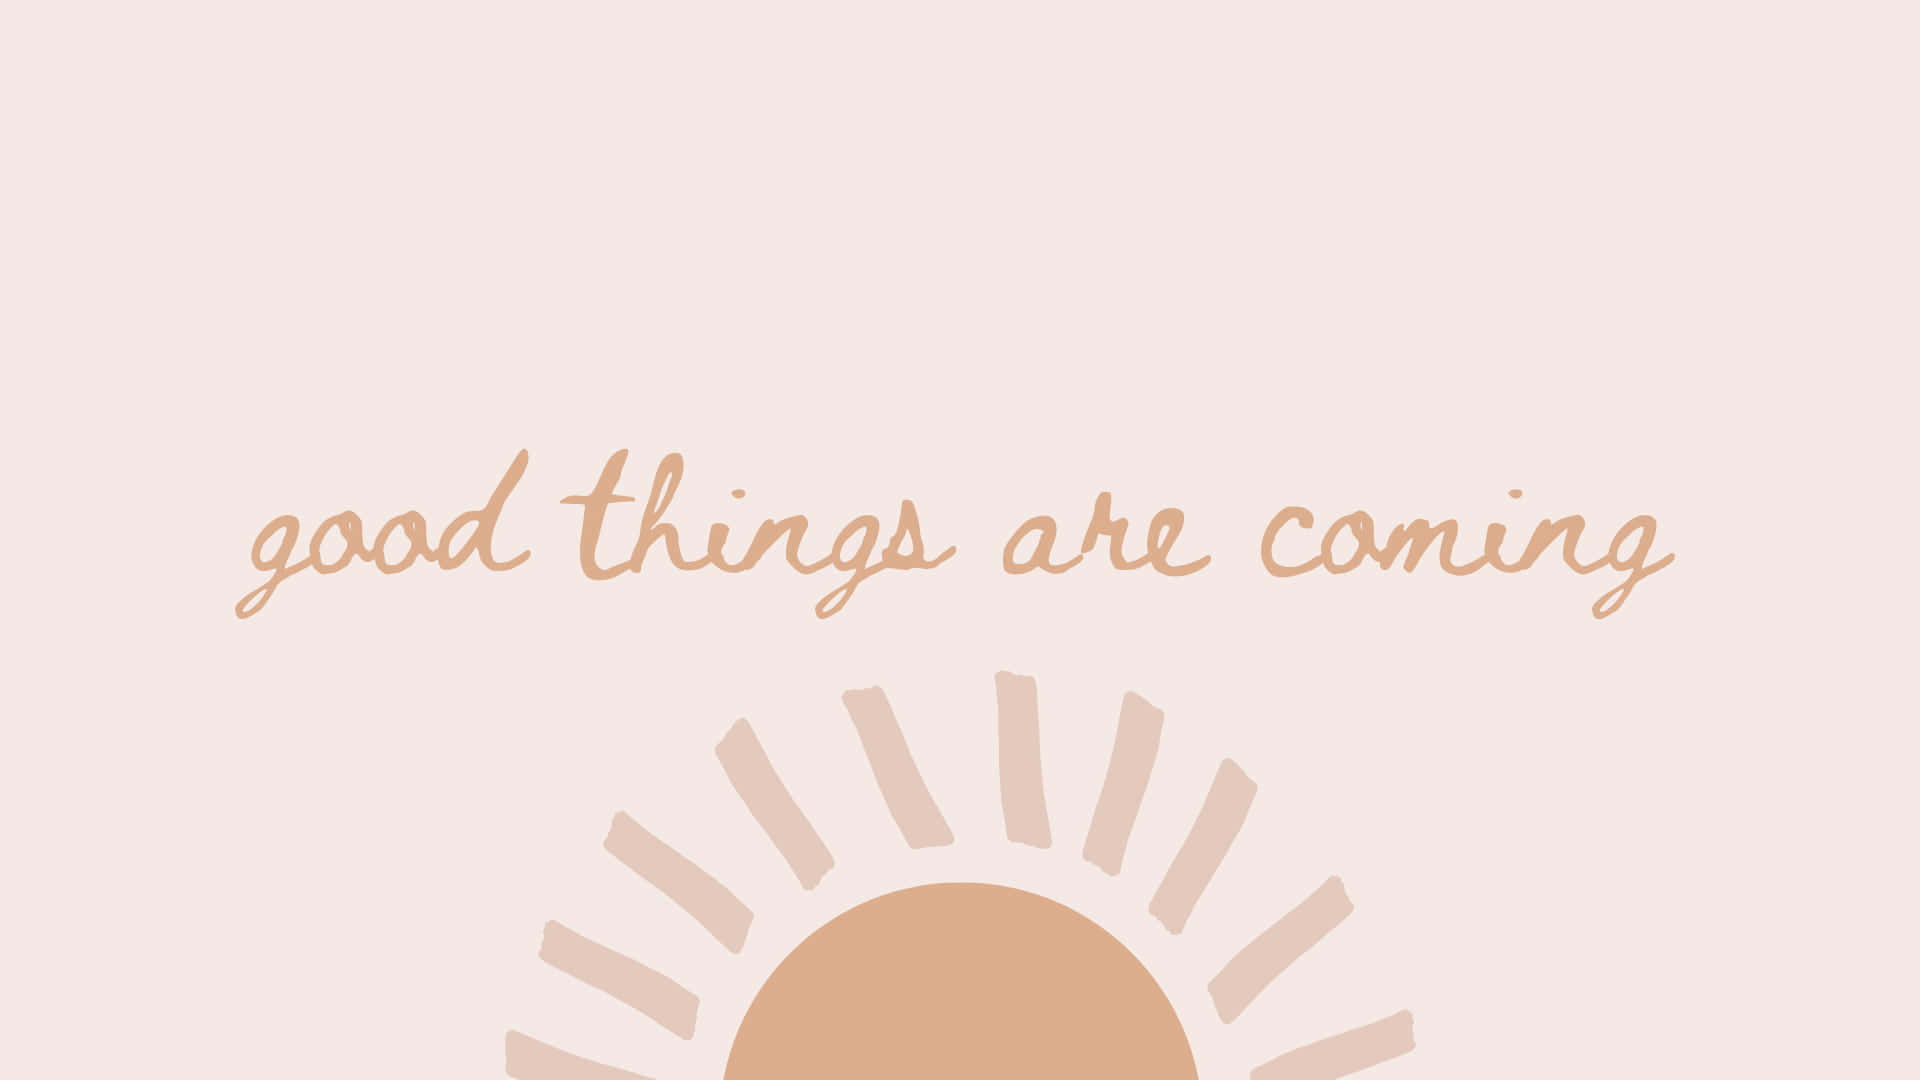 Good Things Are Coming Wallpaper